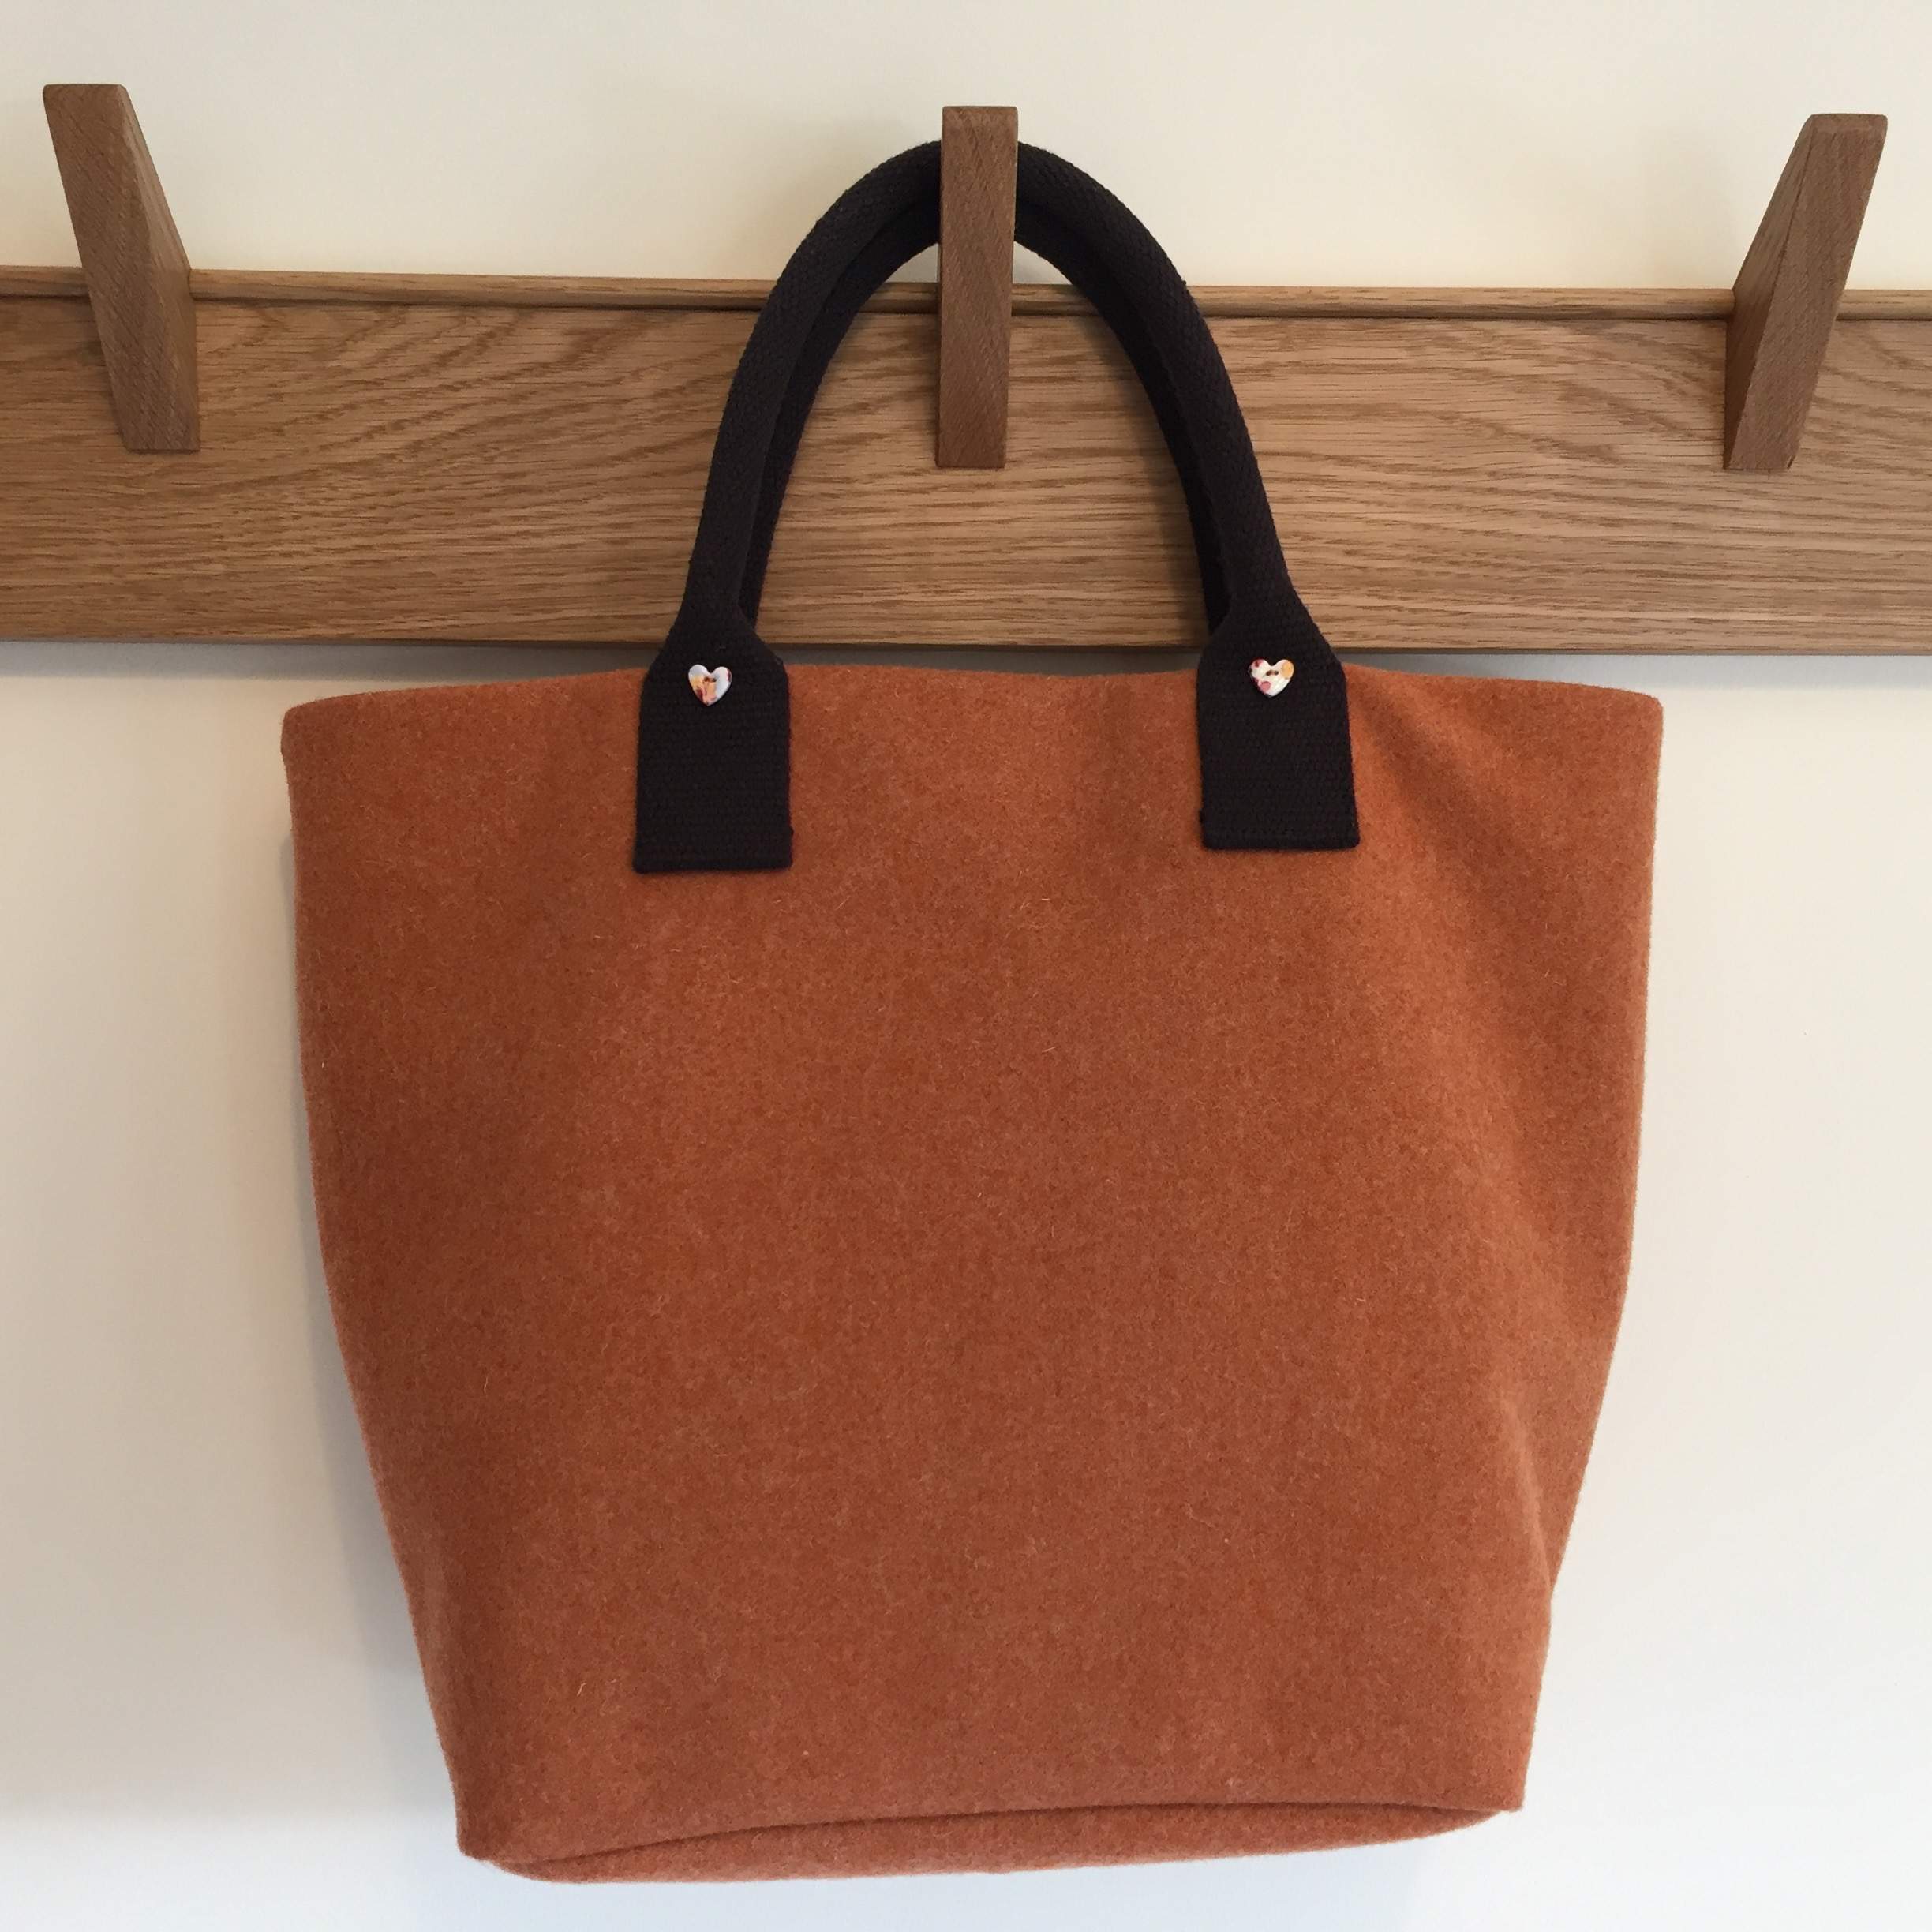 Wool Tote in Burnt Orange with Front Pocket